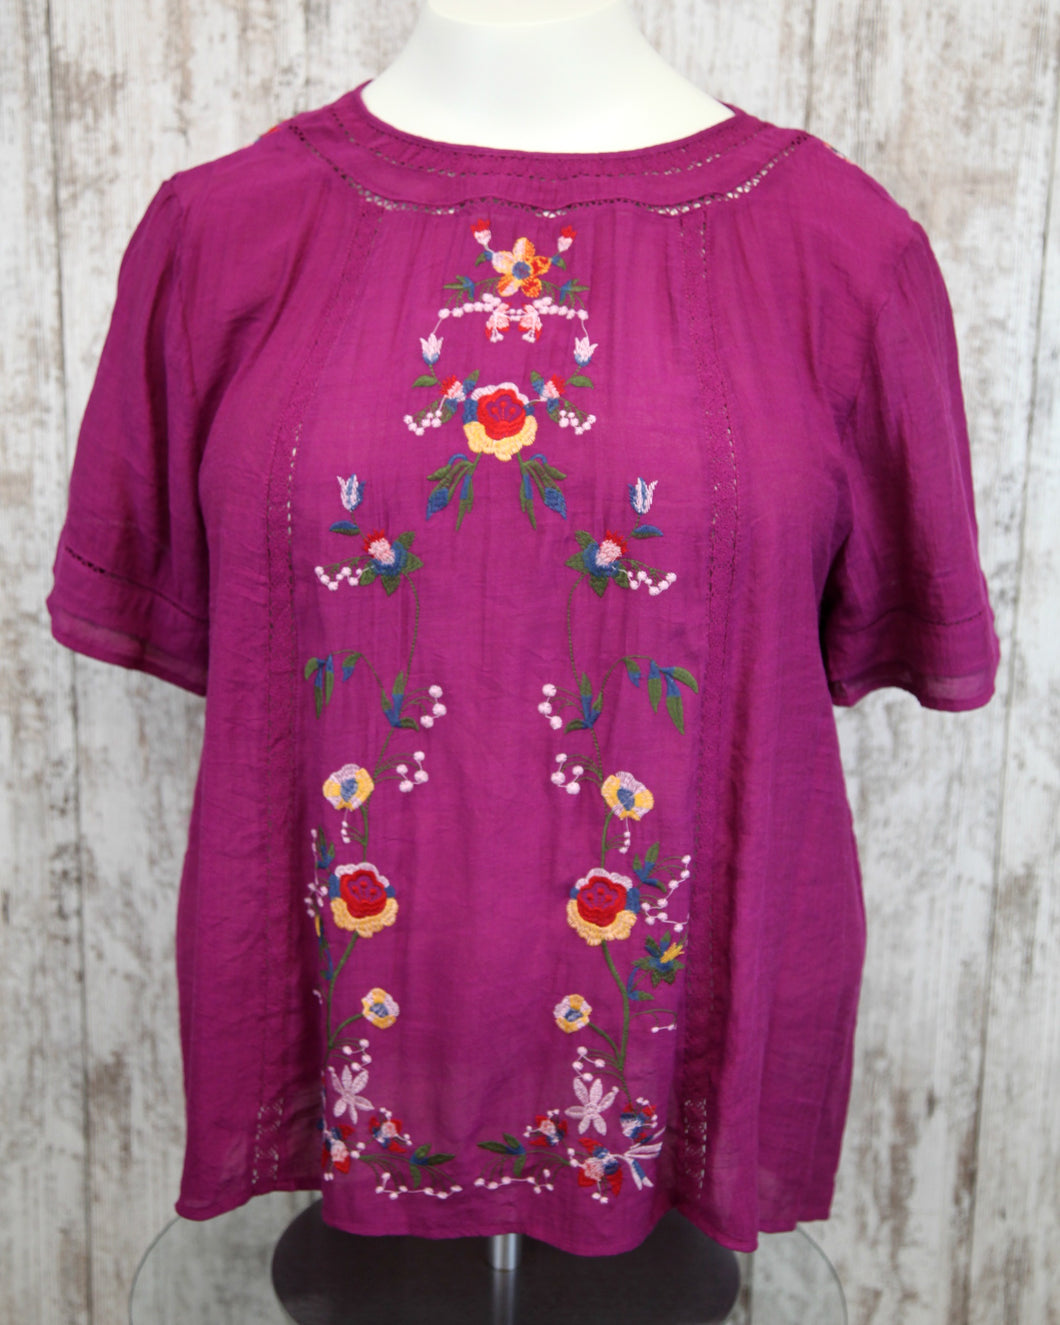 PLUS Floral Embroidered Short Slv Top w Crochet Trim WA3104